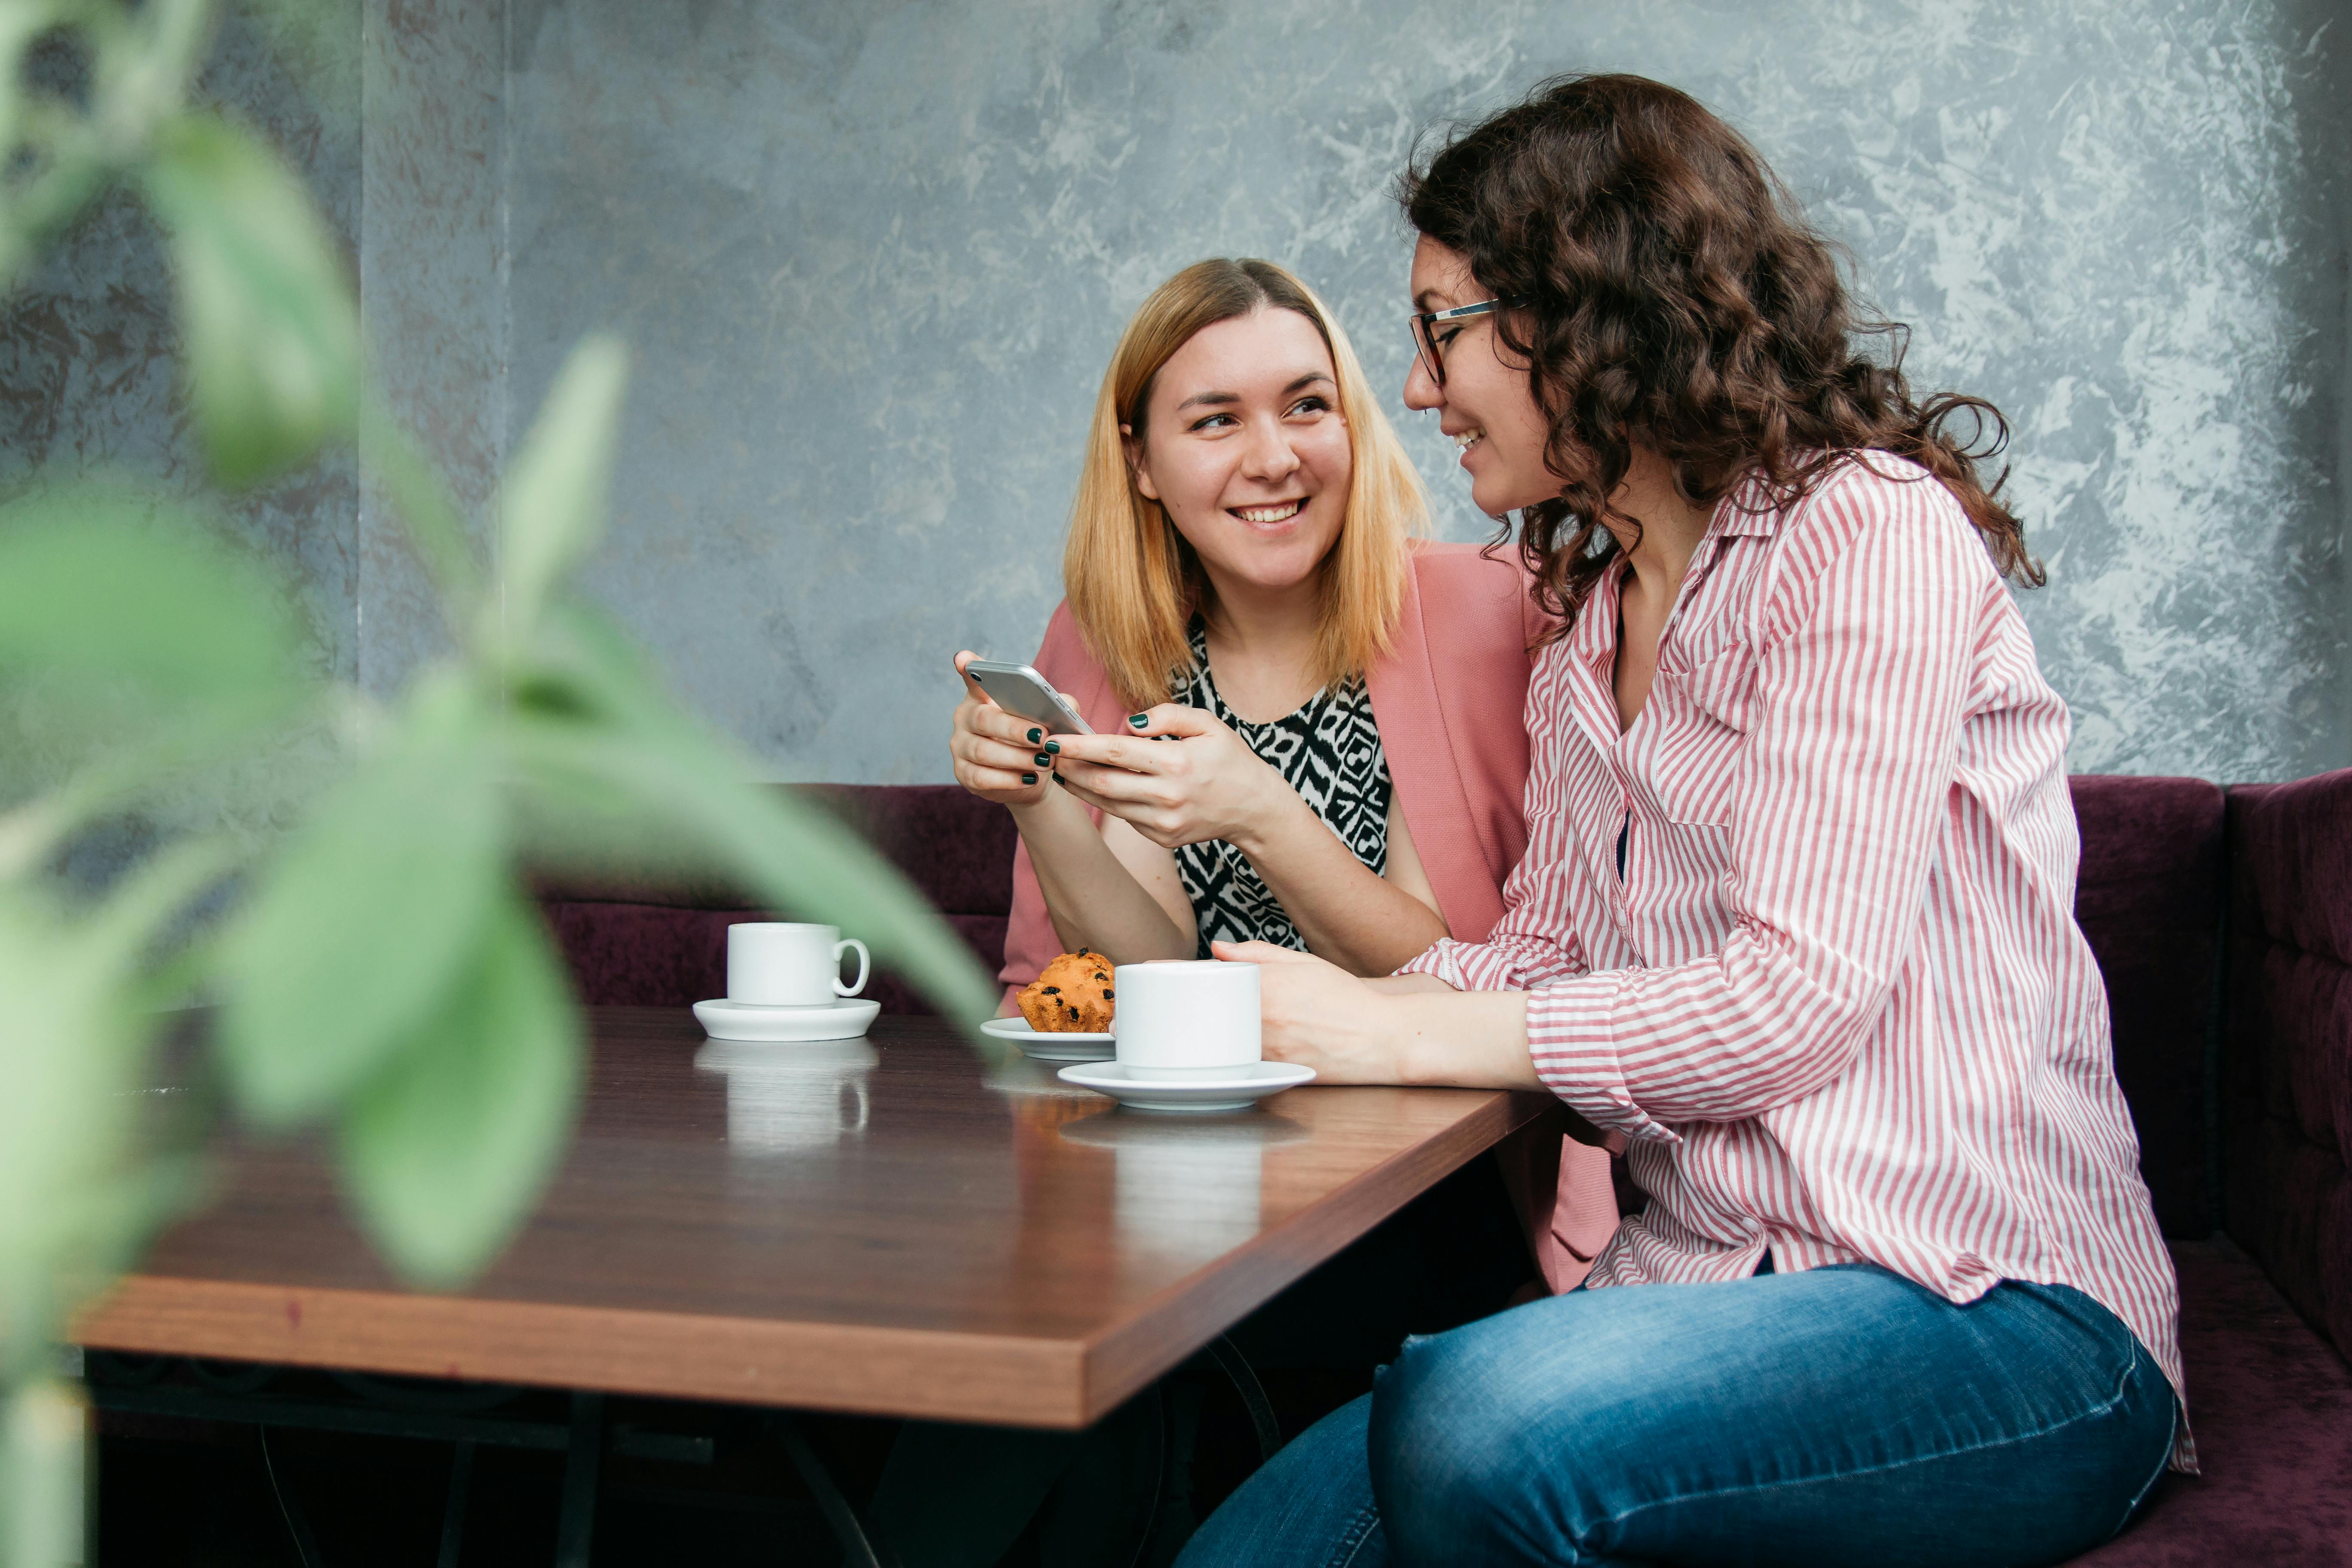 Two women talking over coffee | Source: Pexels